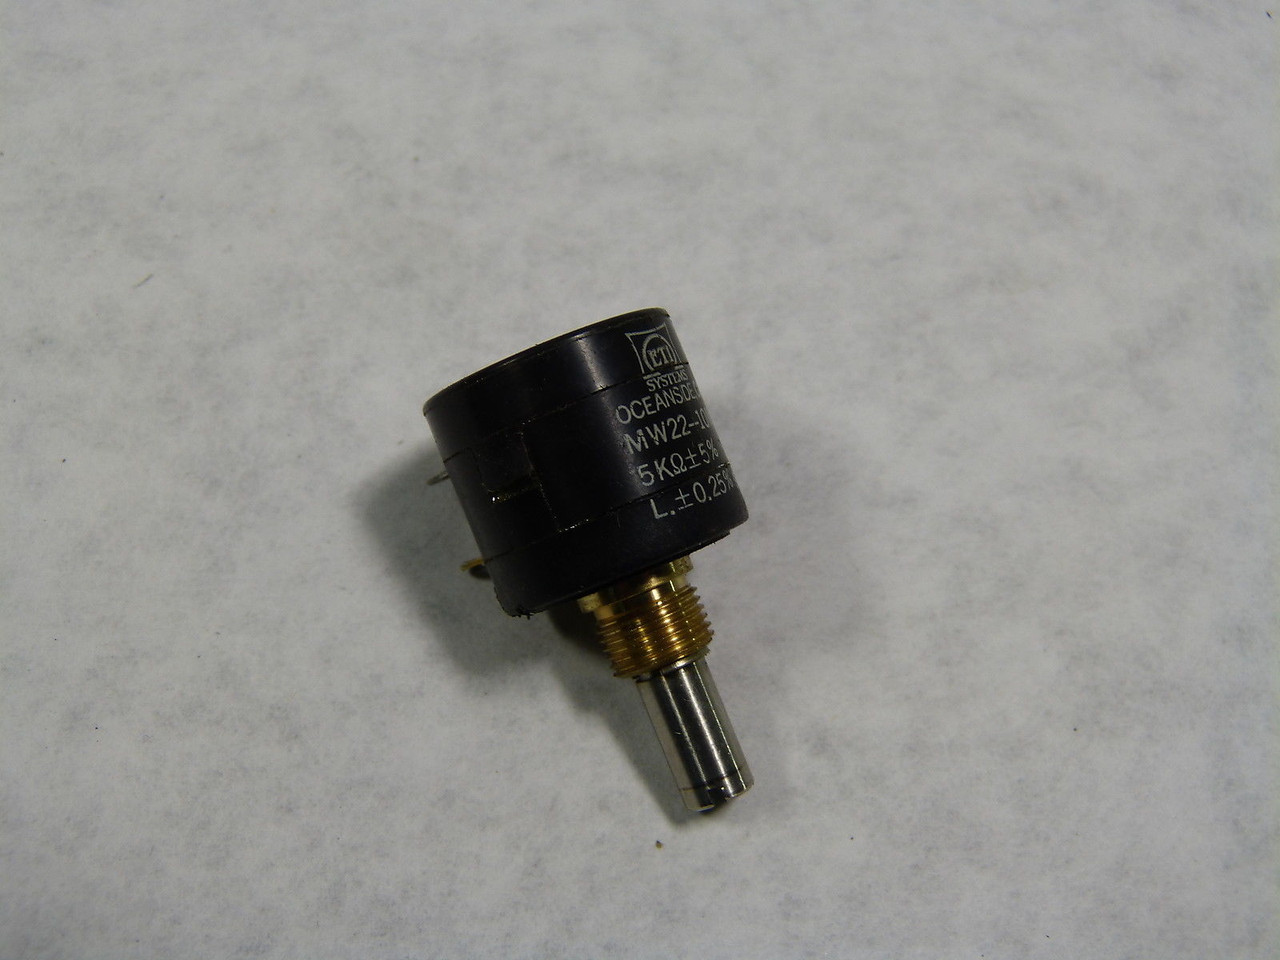 ETI Systems MW22-10mm Potentiometer / Dial Combination COSMETIC DAMAGE USED